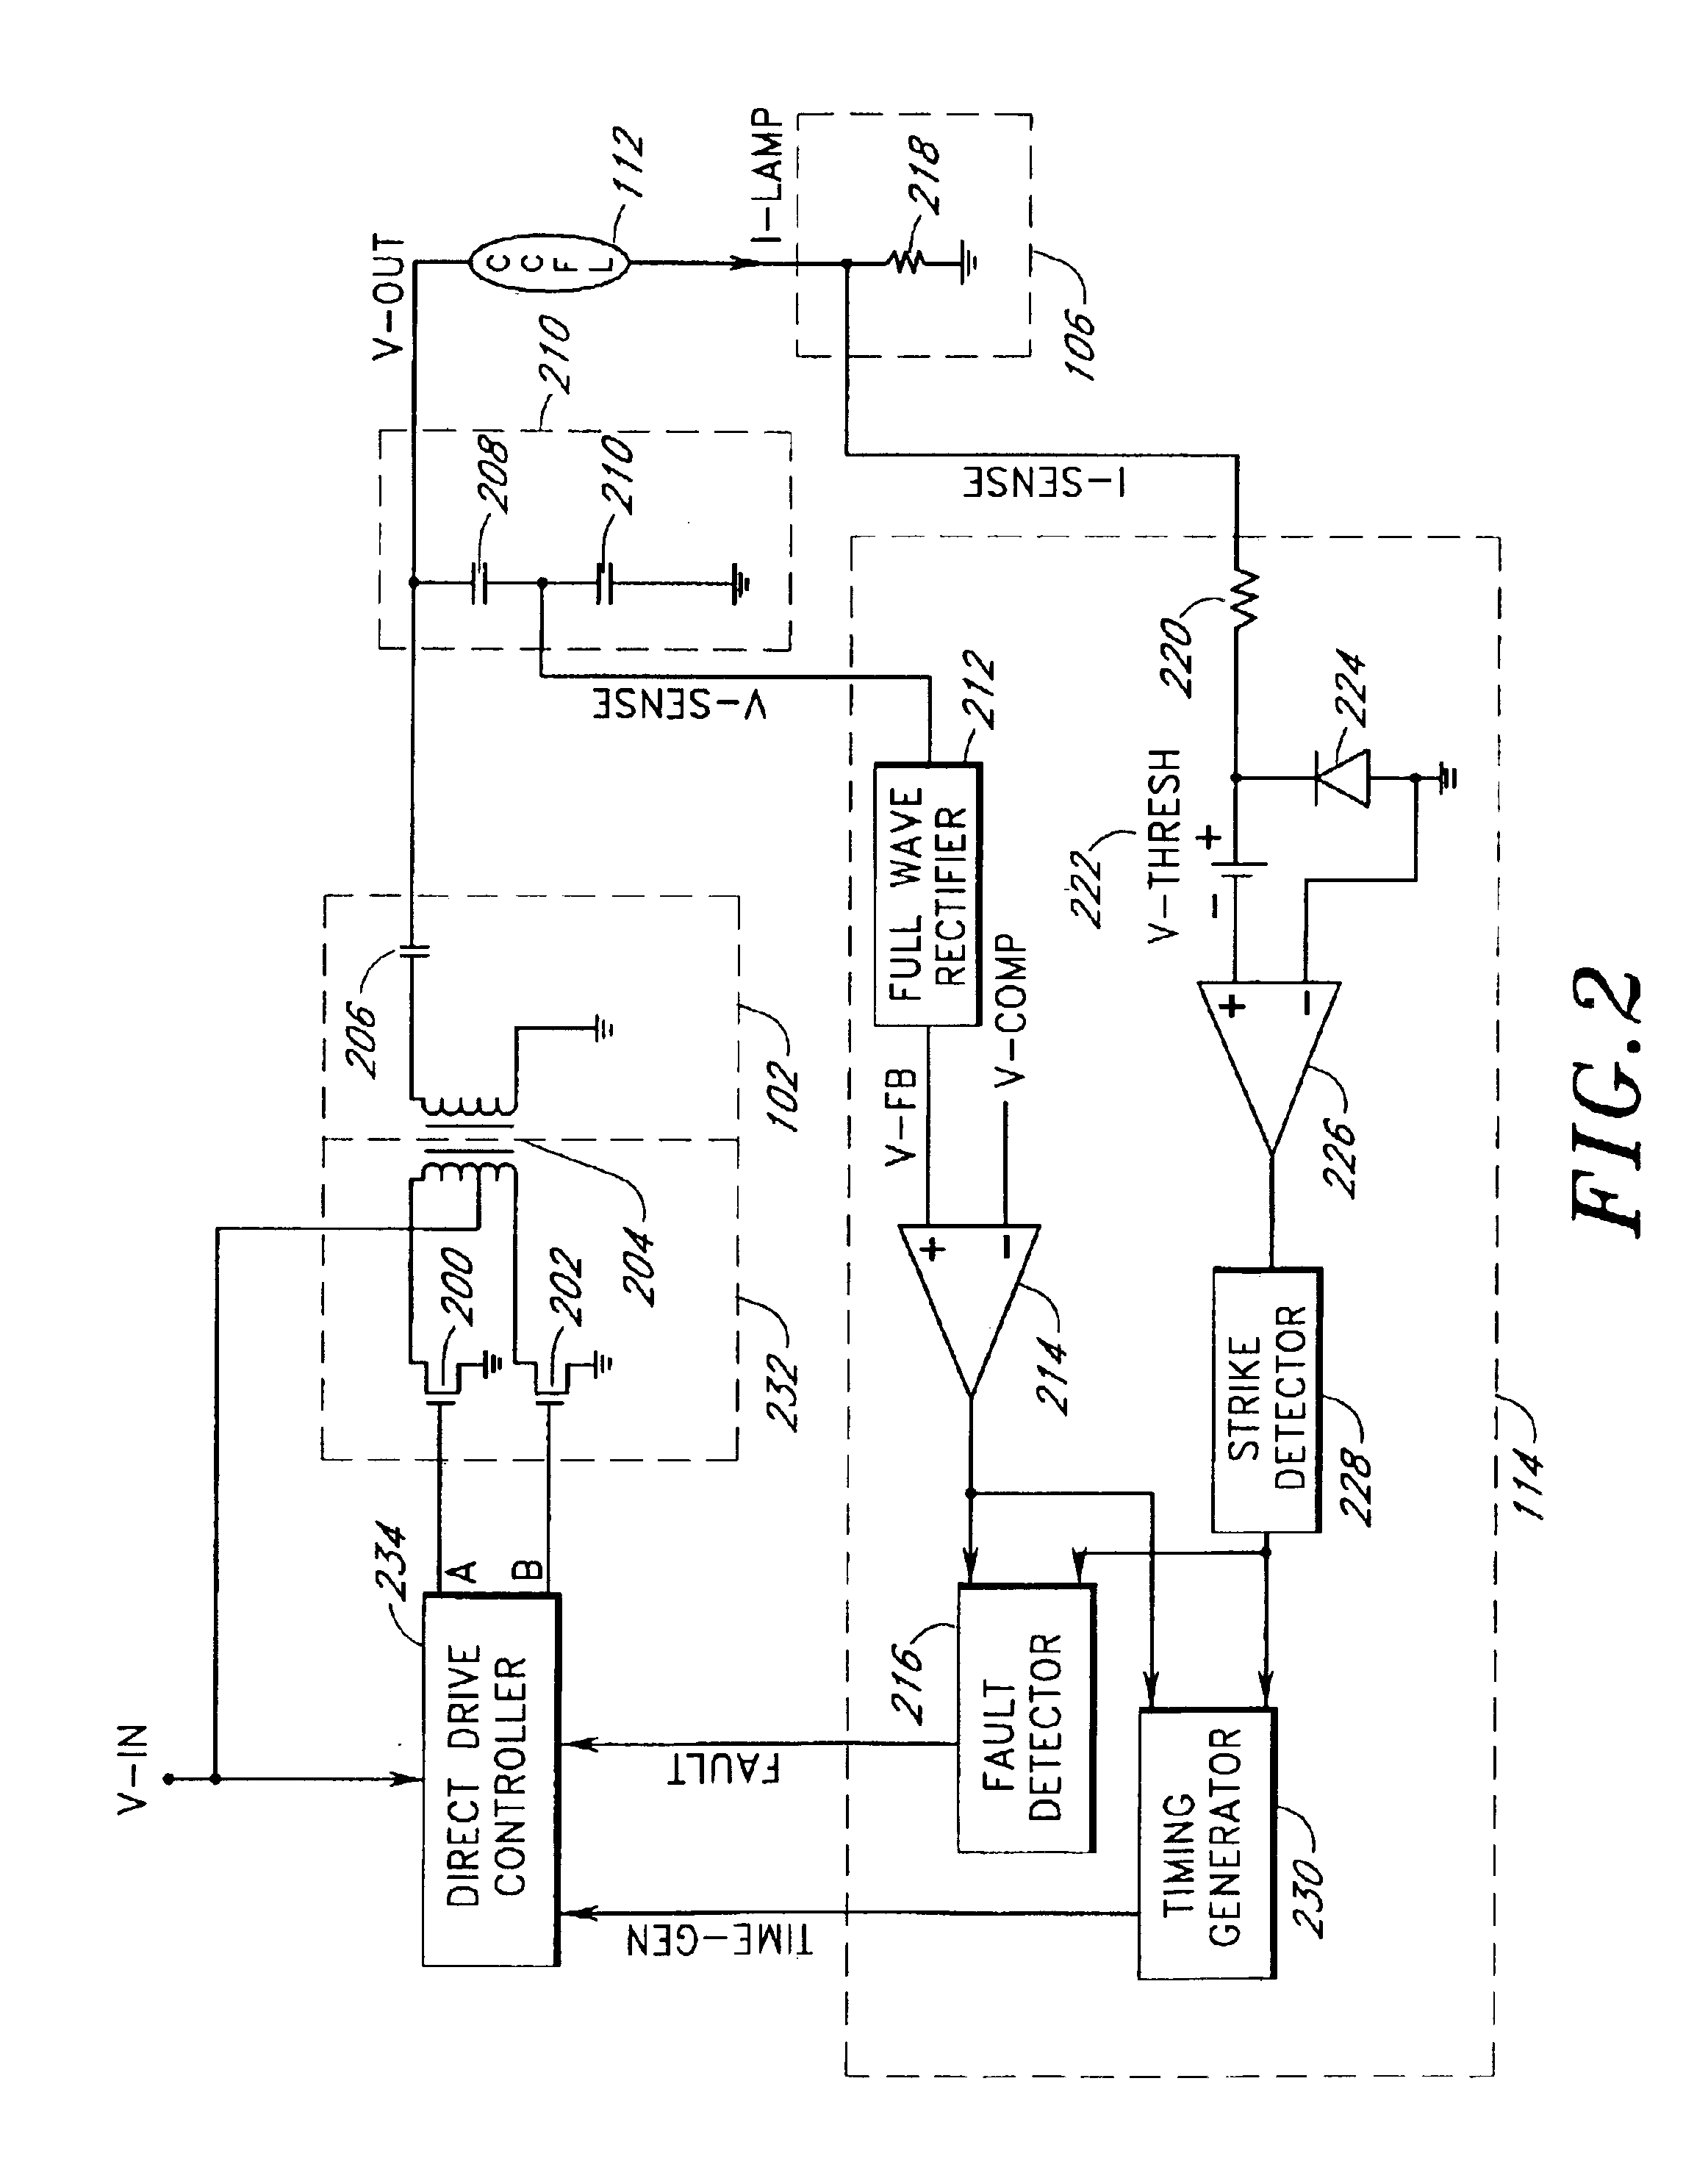 Apparatus and method for striking a fluorescent lamp